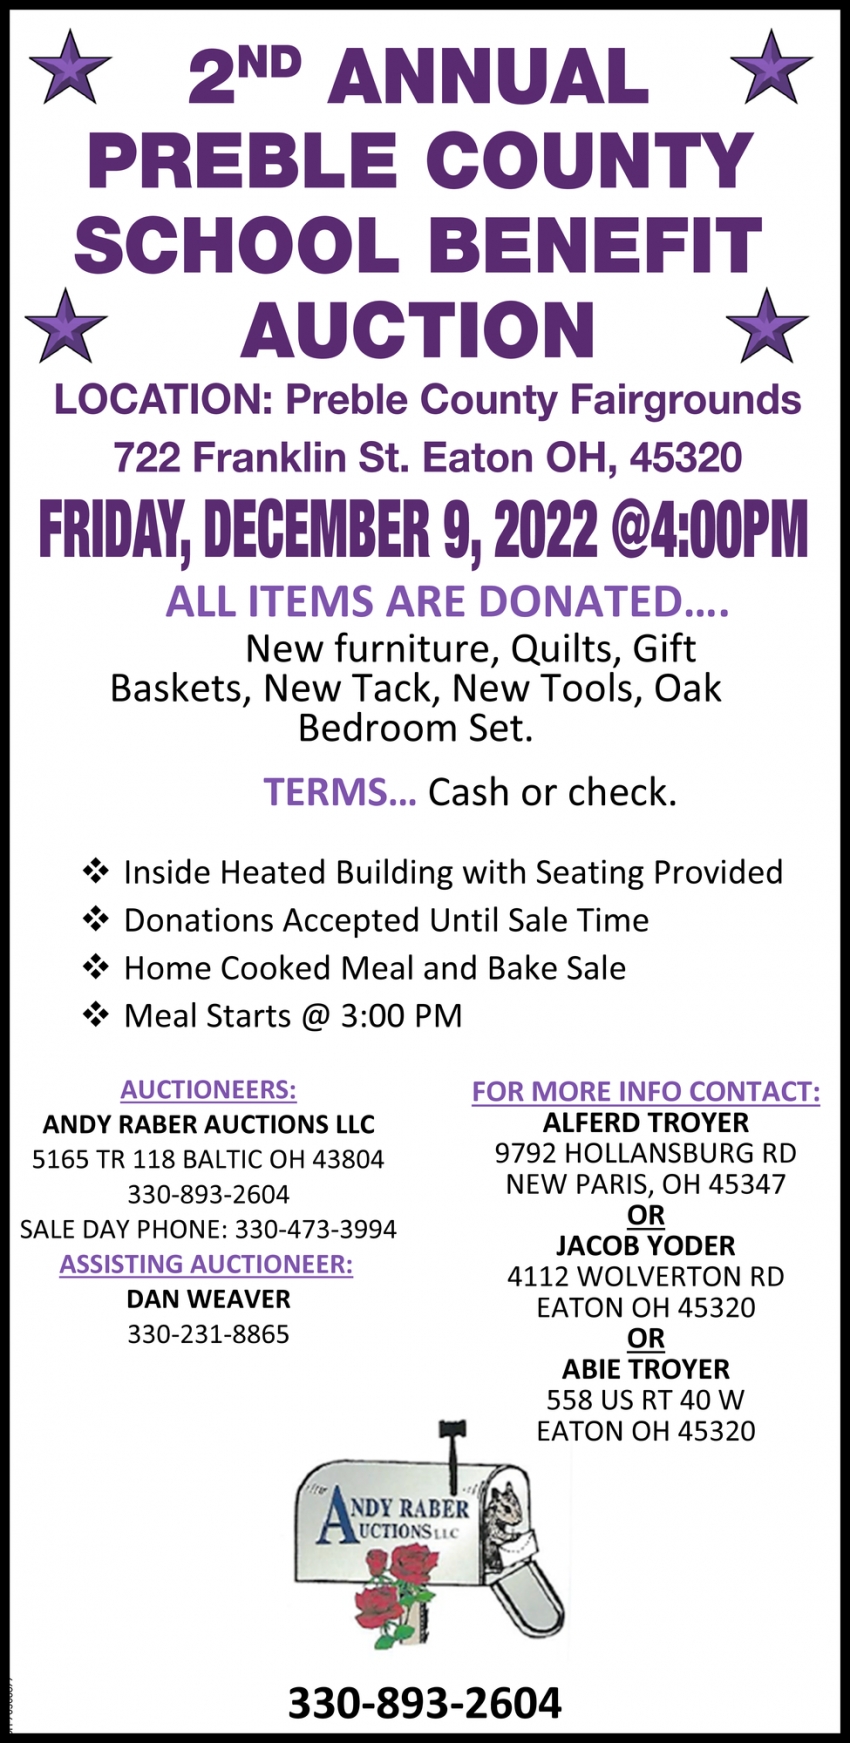 2nd Annual Preble County School Benefit Auction